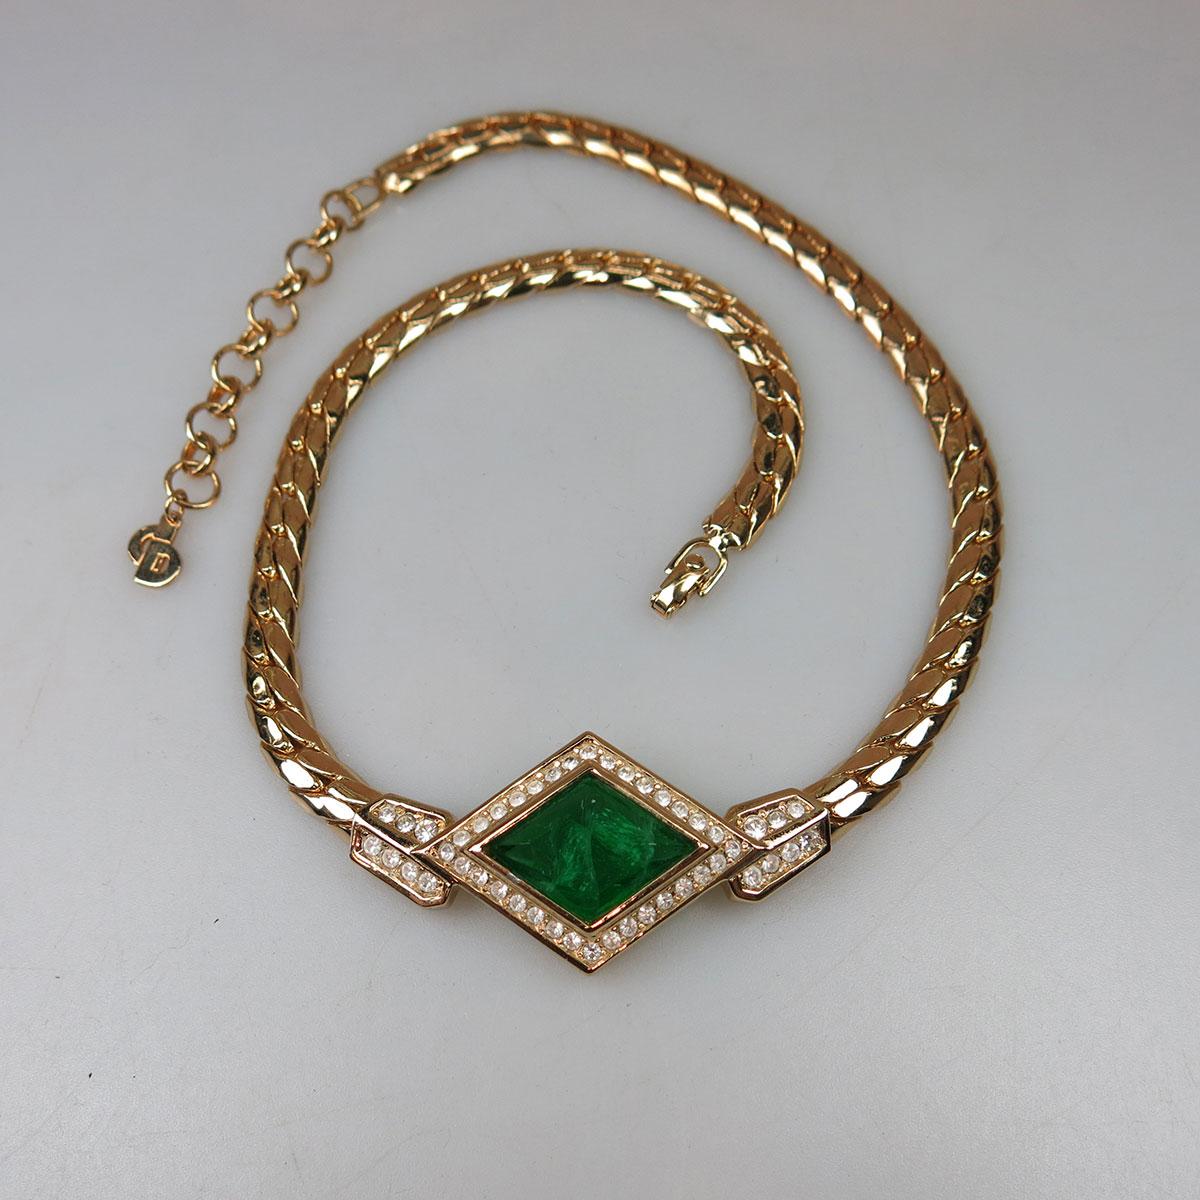 Christian Dior Gold Tone Metal Necklace